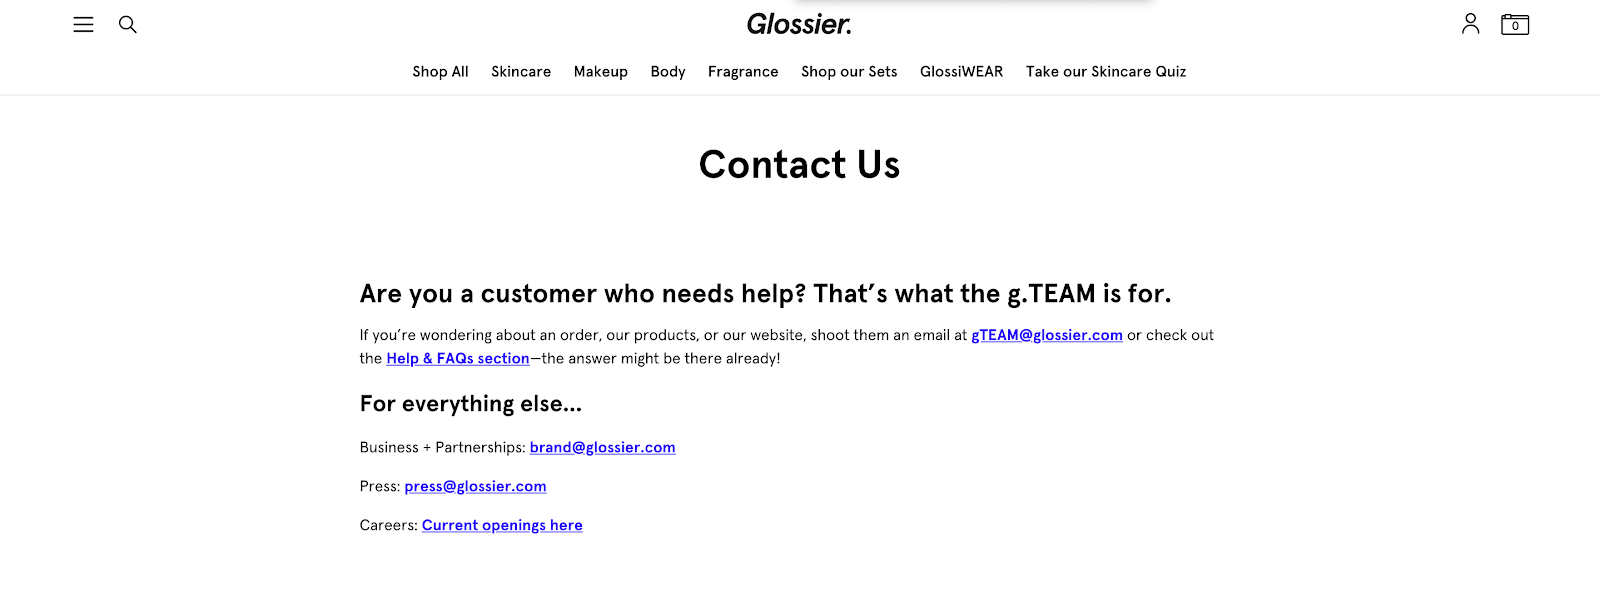 Glossier Contact Us Page